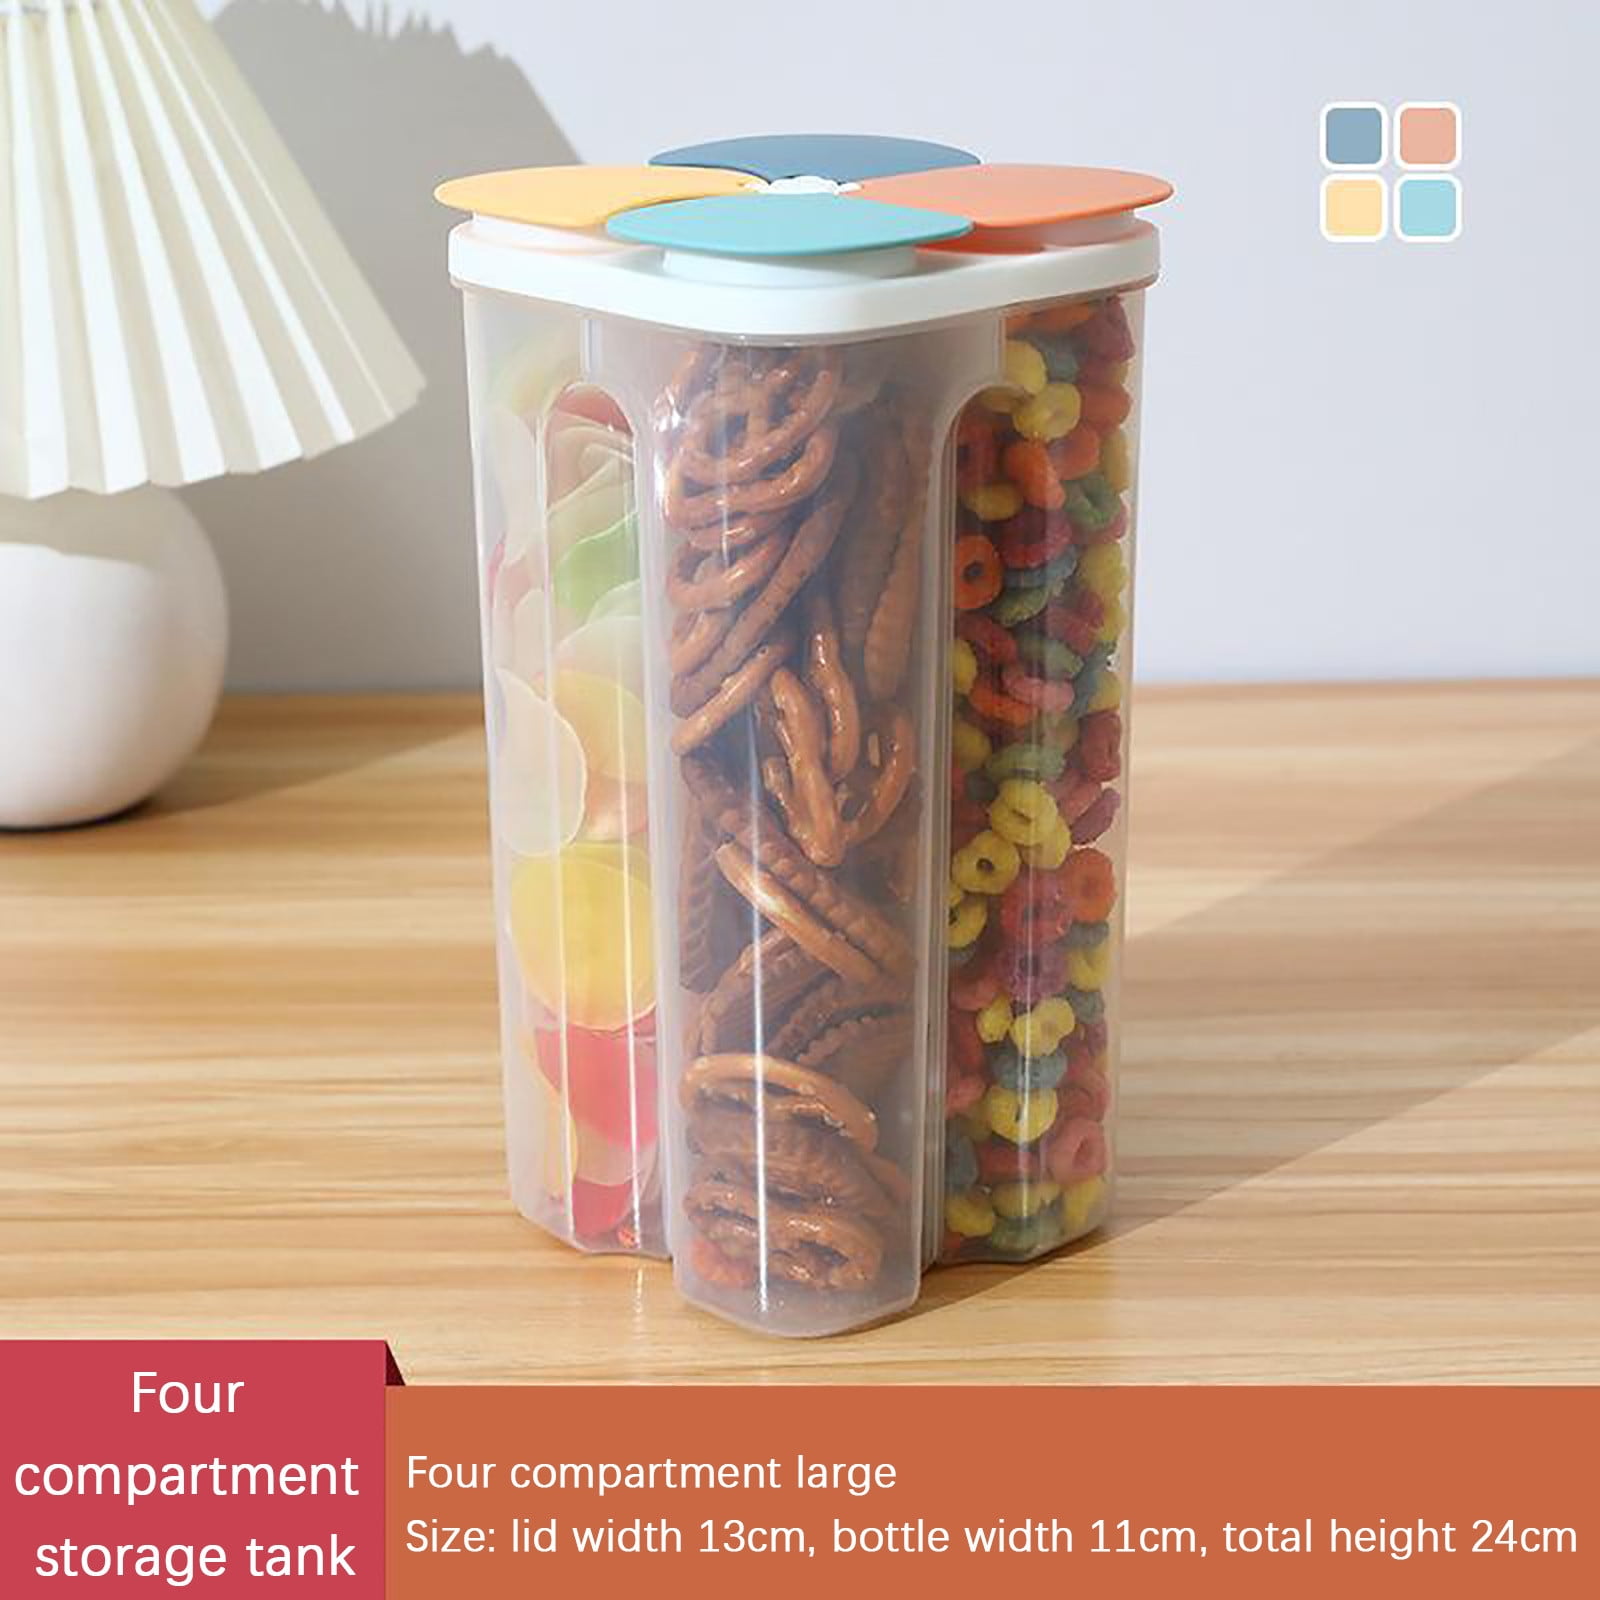 Vikakiooze Storage Containers Transparent Food Grain Seal Storage Cans Jar  Tank Divider Boxes Kitchen Plastic, Christmas Gift 